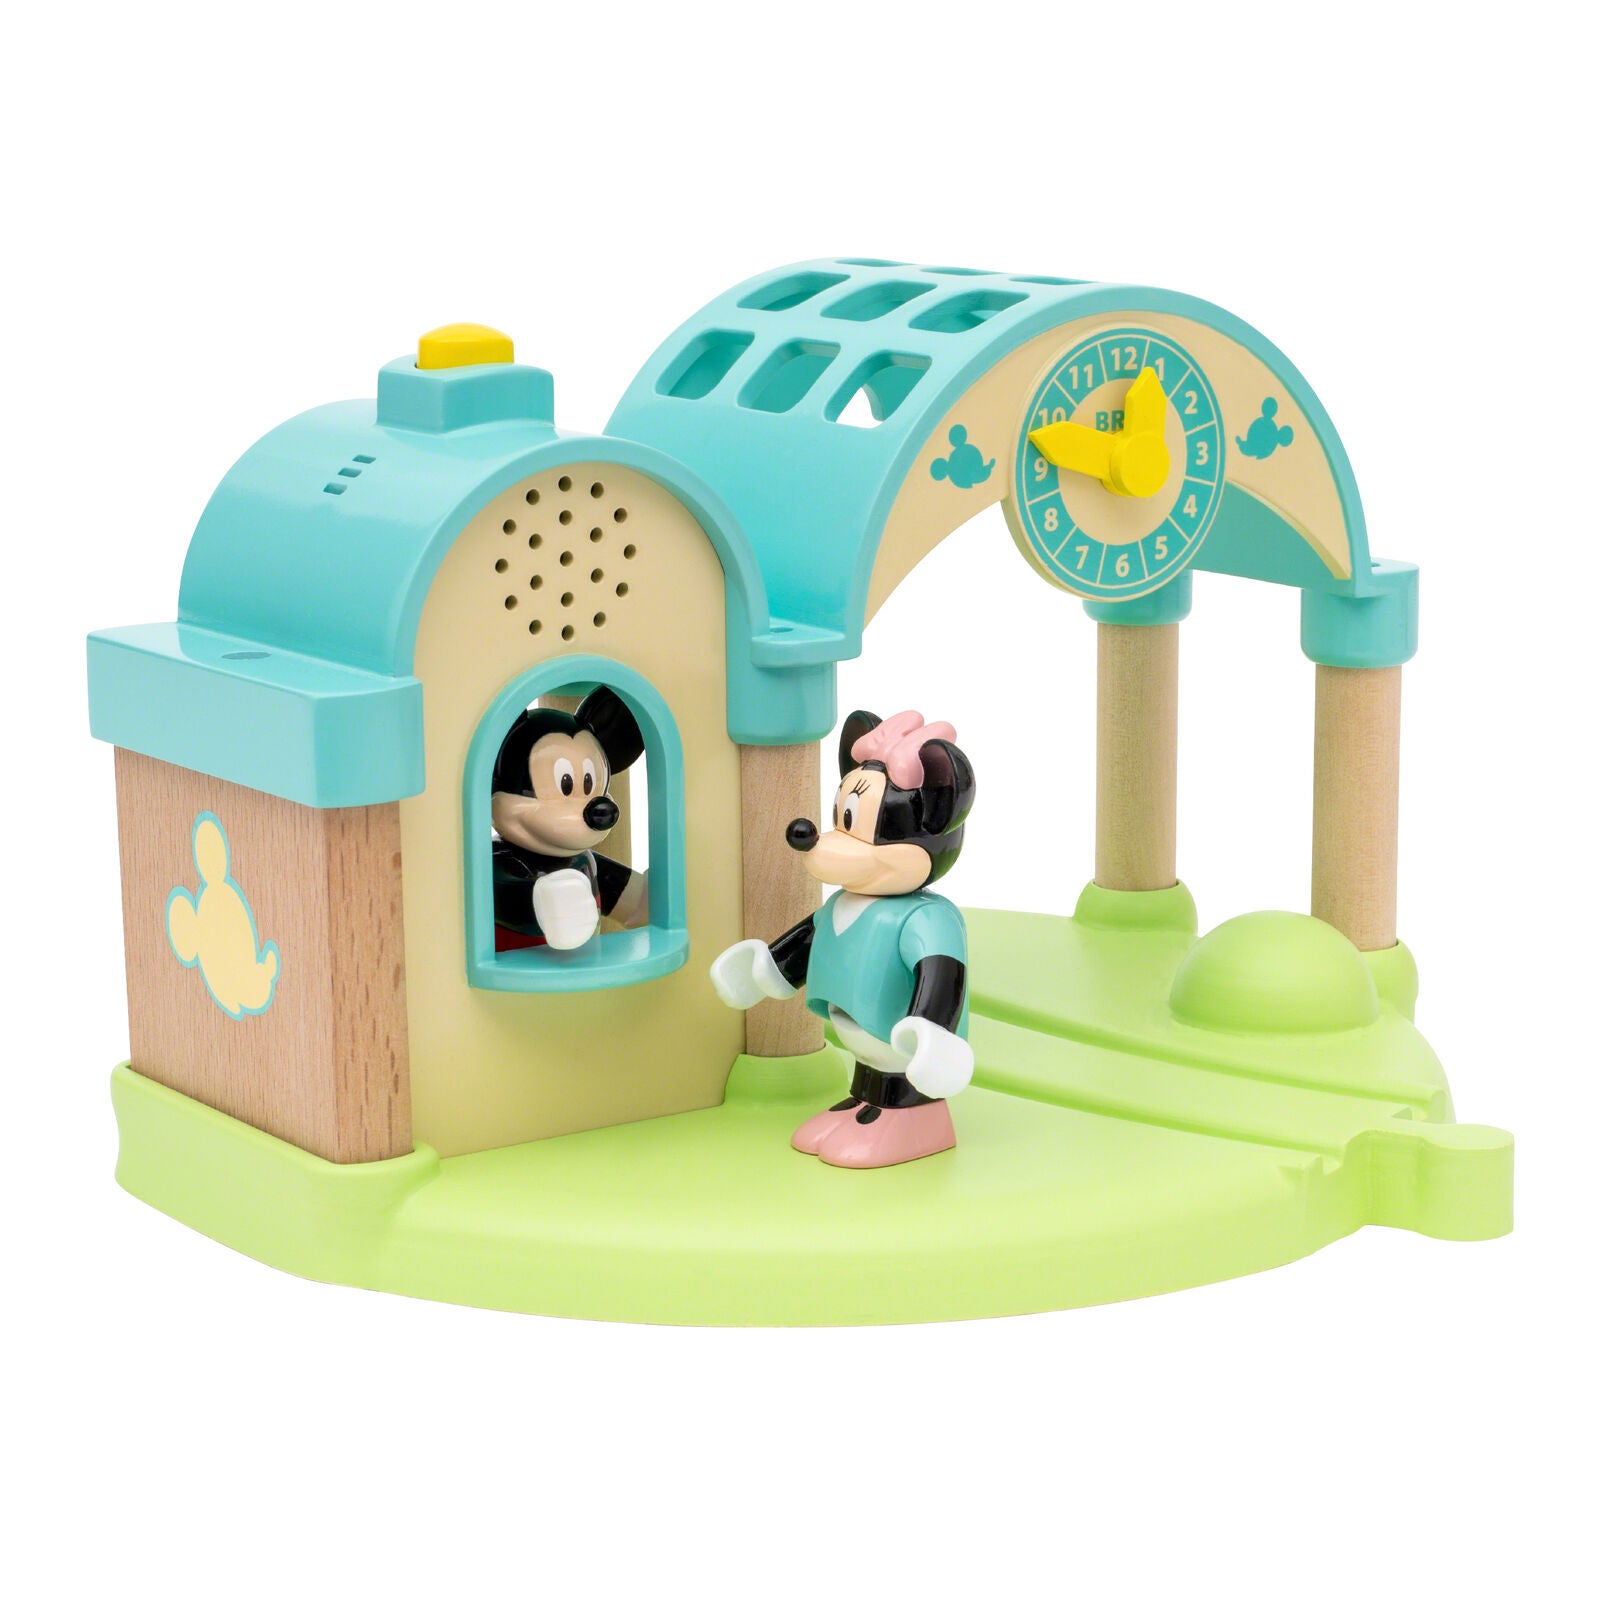 32270 BRIO Disney Mickey Mouse Record & Play Train Station Wooden Railway Age 3+